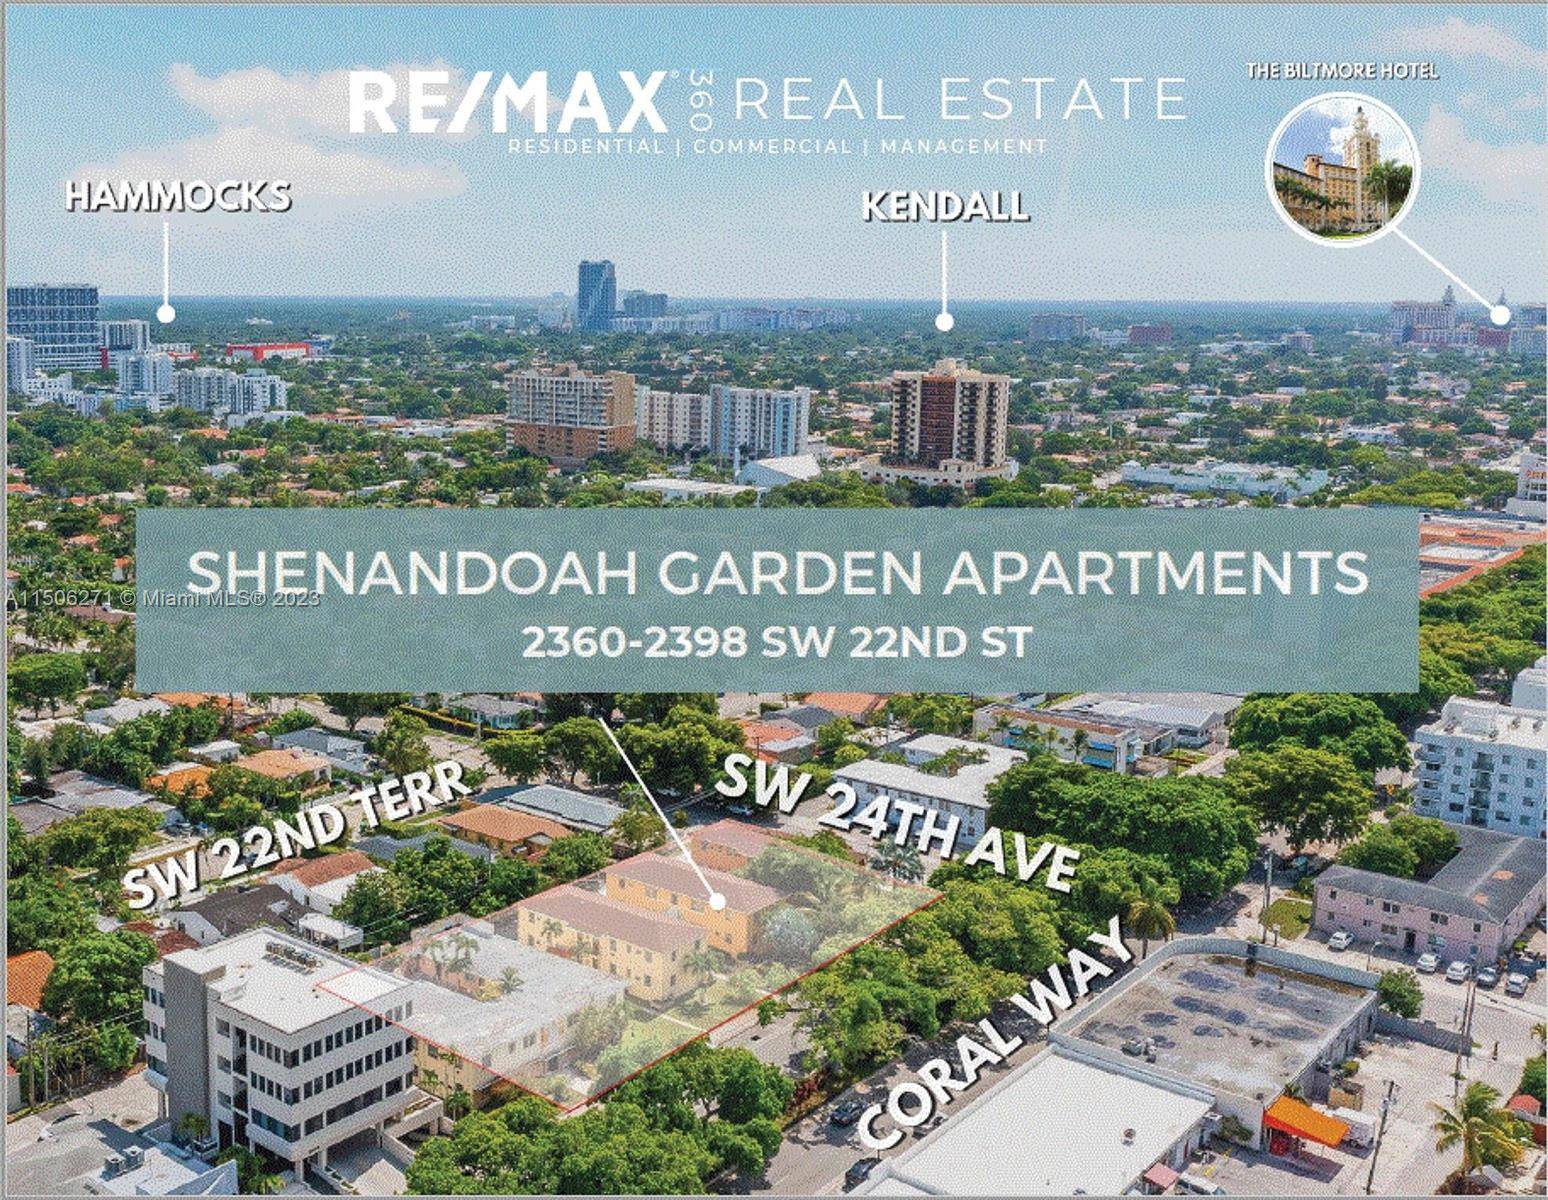 Welcome to the Shenandoah Garden Apartments, located at 2360 2398 SW 22nd St 01 4115 006 0450 01 41 15 006 0460 Spanning across two adjacent lots with a generous ...